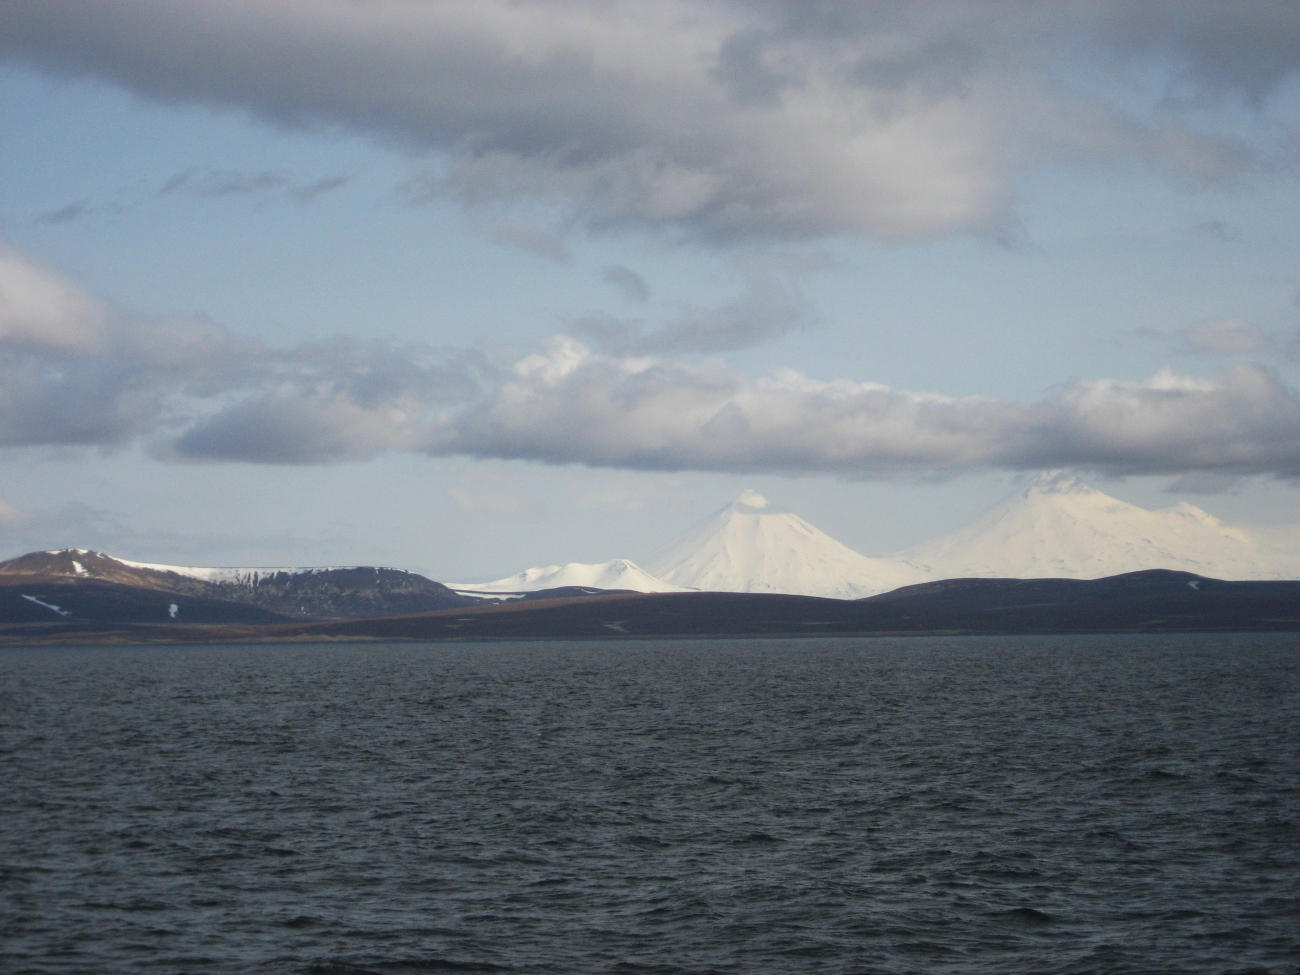 Pavlof Sister and Pavlof Volcano from the north side of the Alaska Peninsula